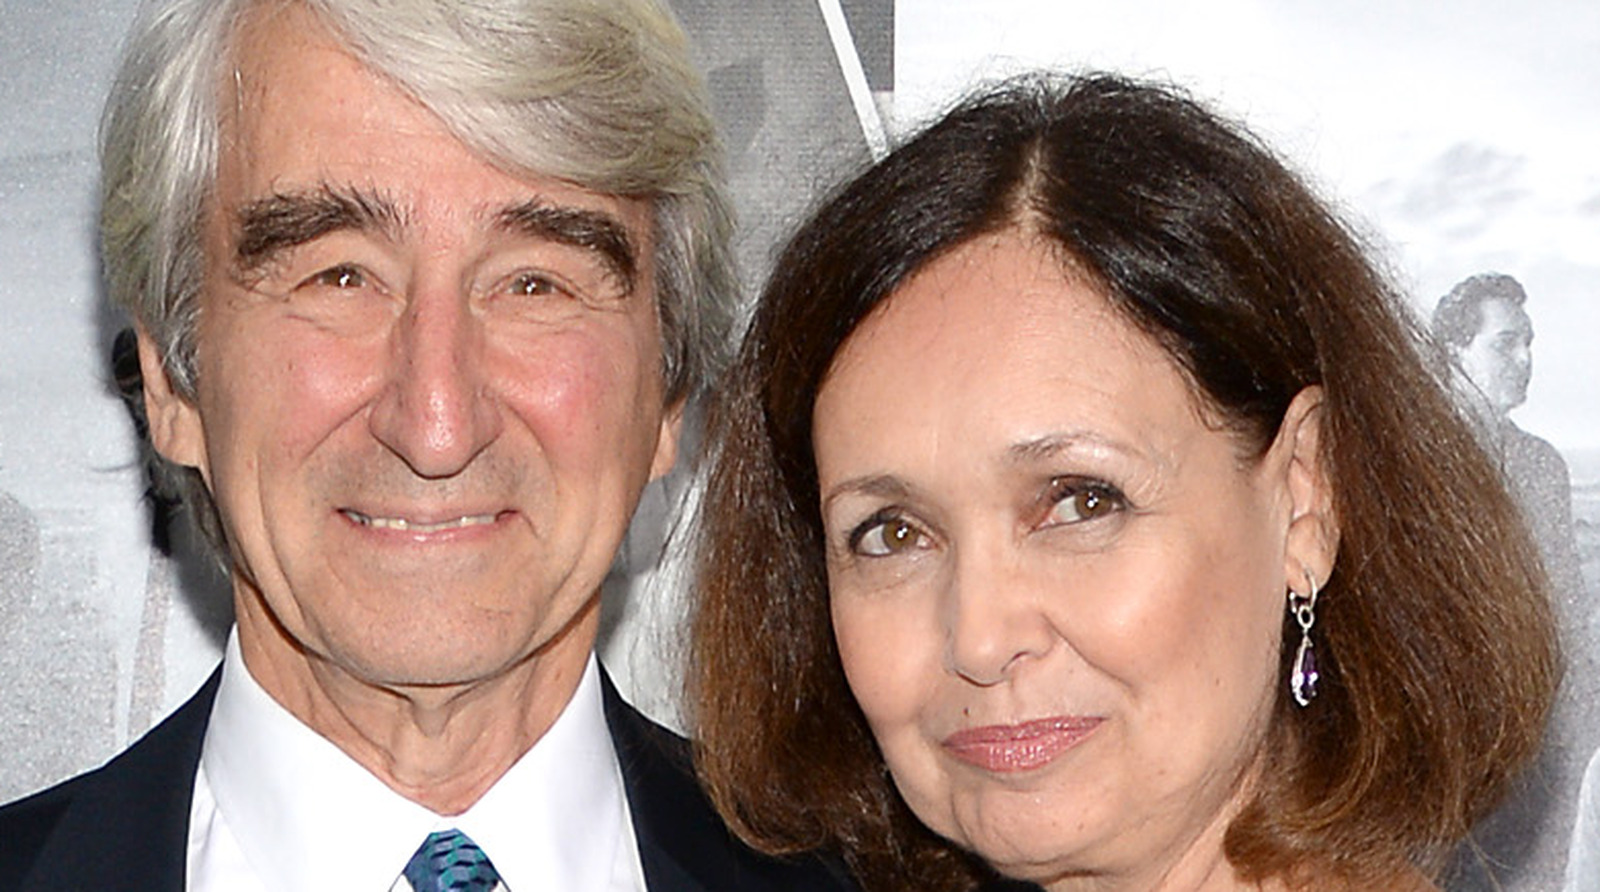 The Truth About Sam Waterston’s Wife